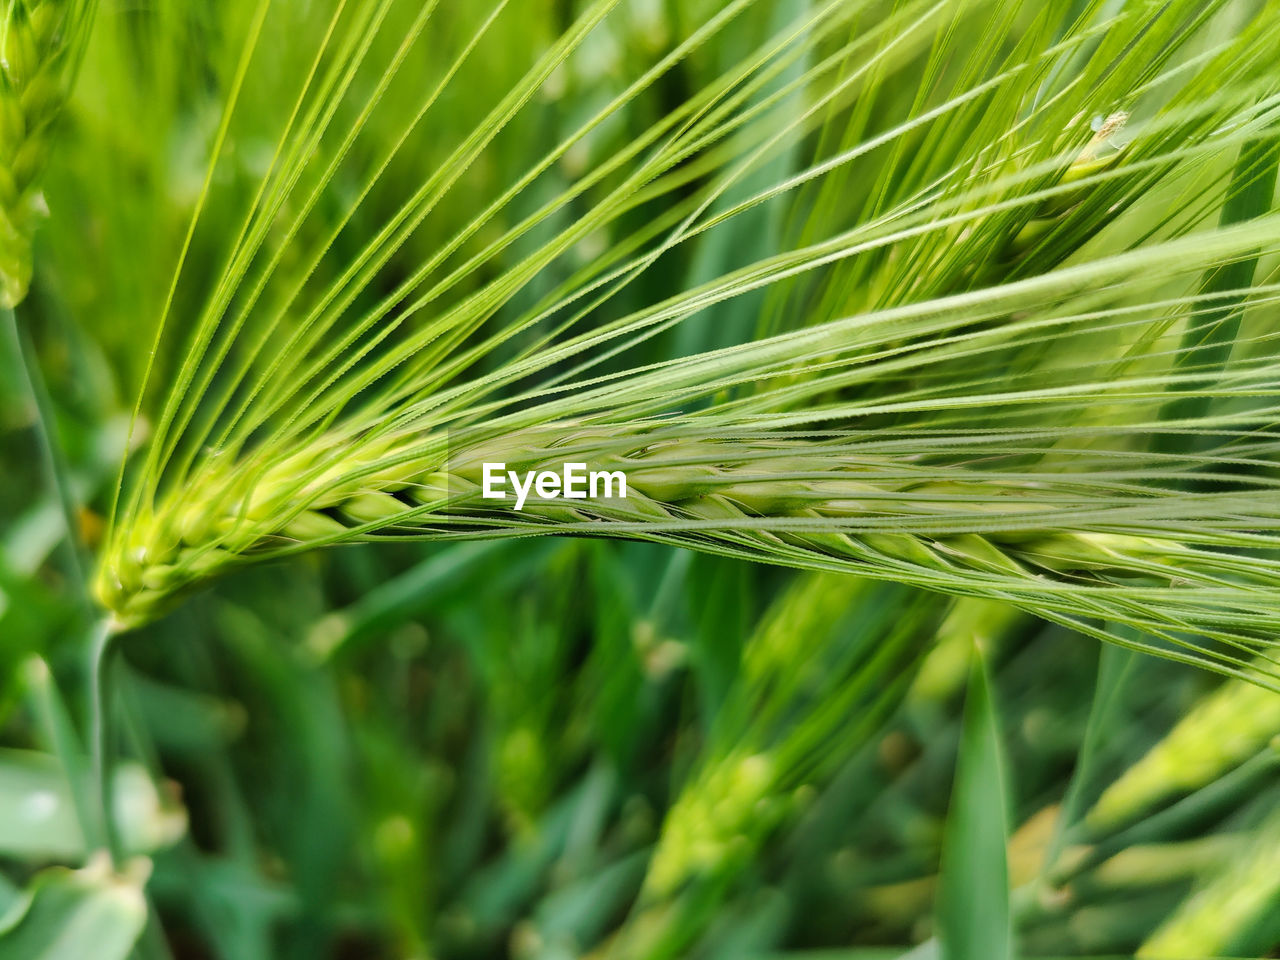 CLOSE-UP OF WHEAT CROP GROWING IN FIELD